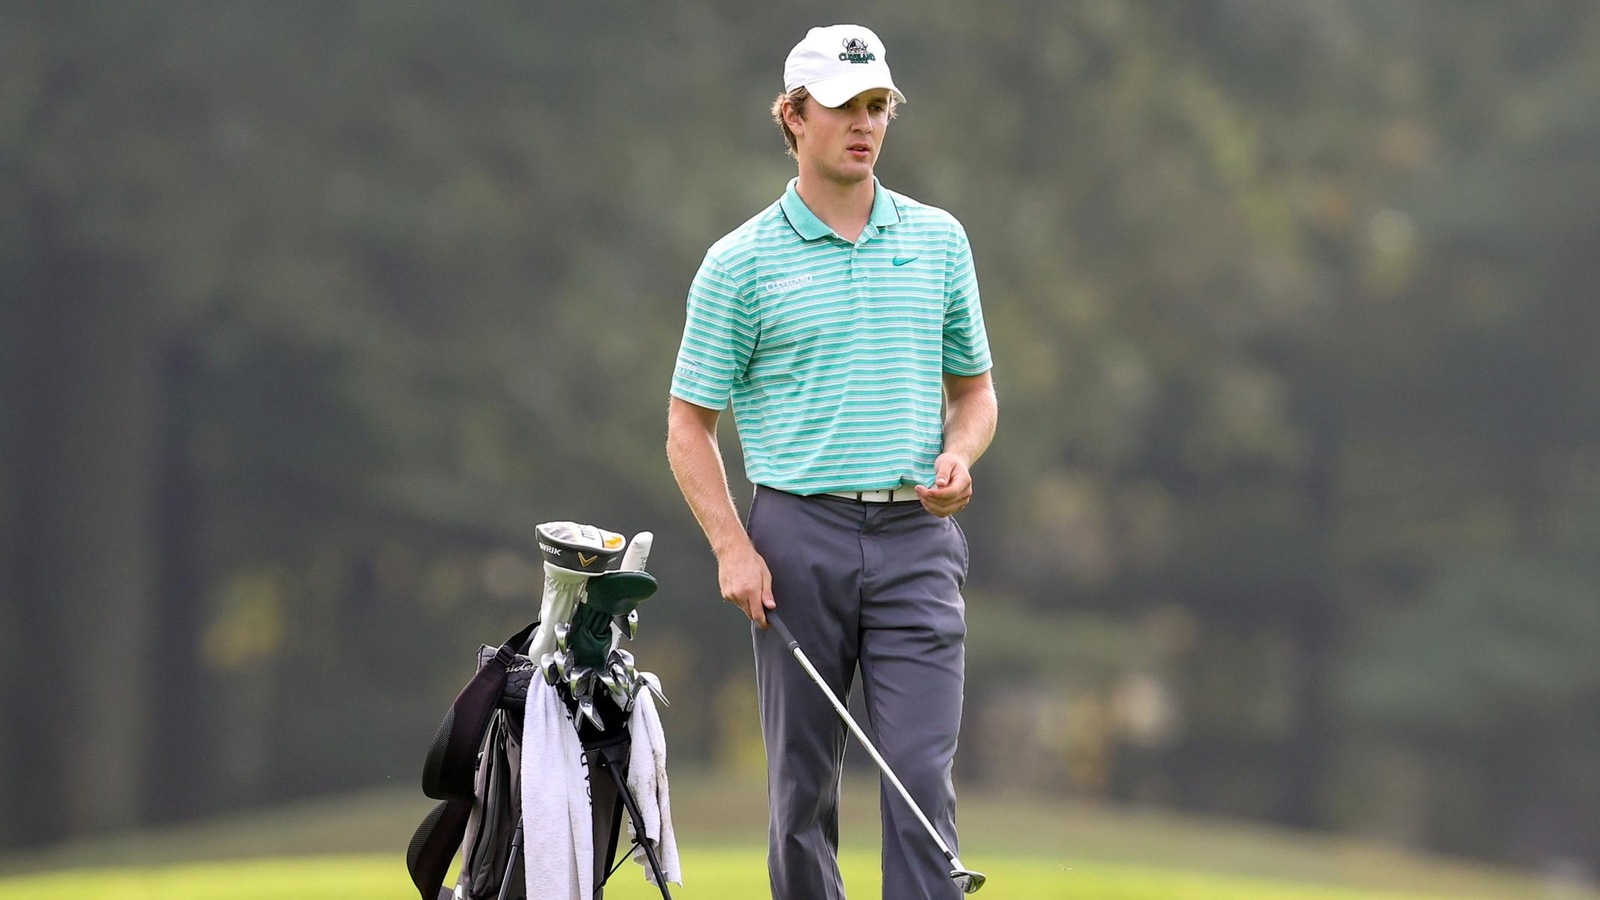 Cleveland State Men’s Golf Returns To Action At Joe Feaganes Marshall Invite